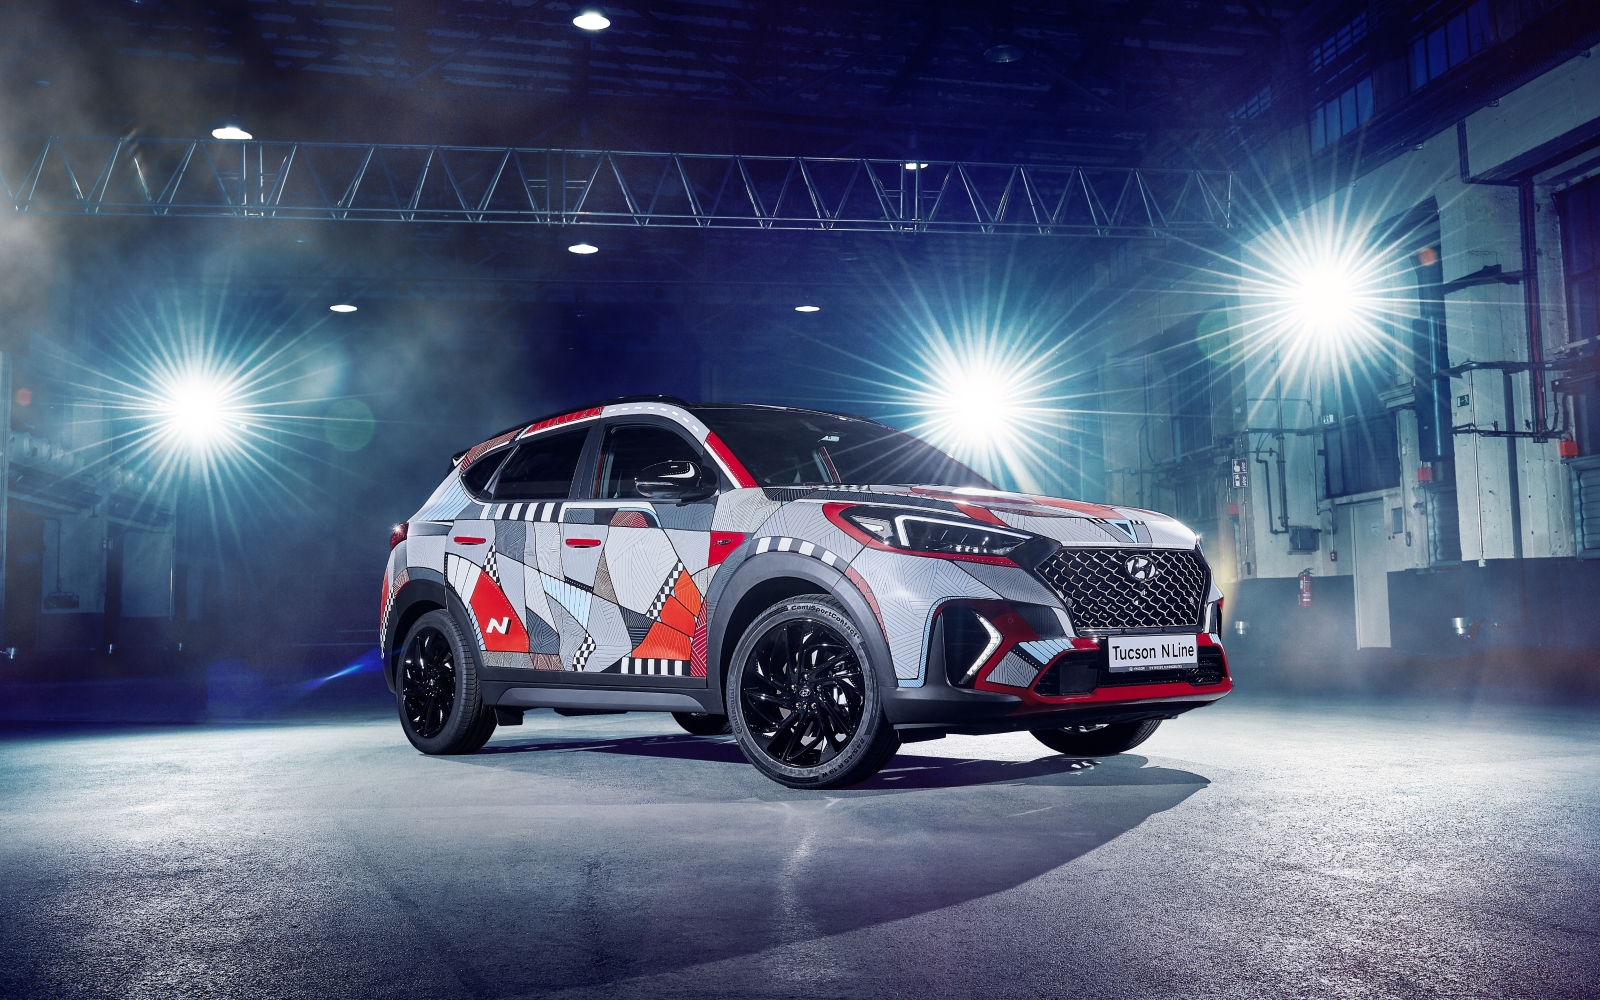 Hyundai celebrates launch of New Tucson N Line with unique art project